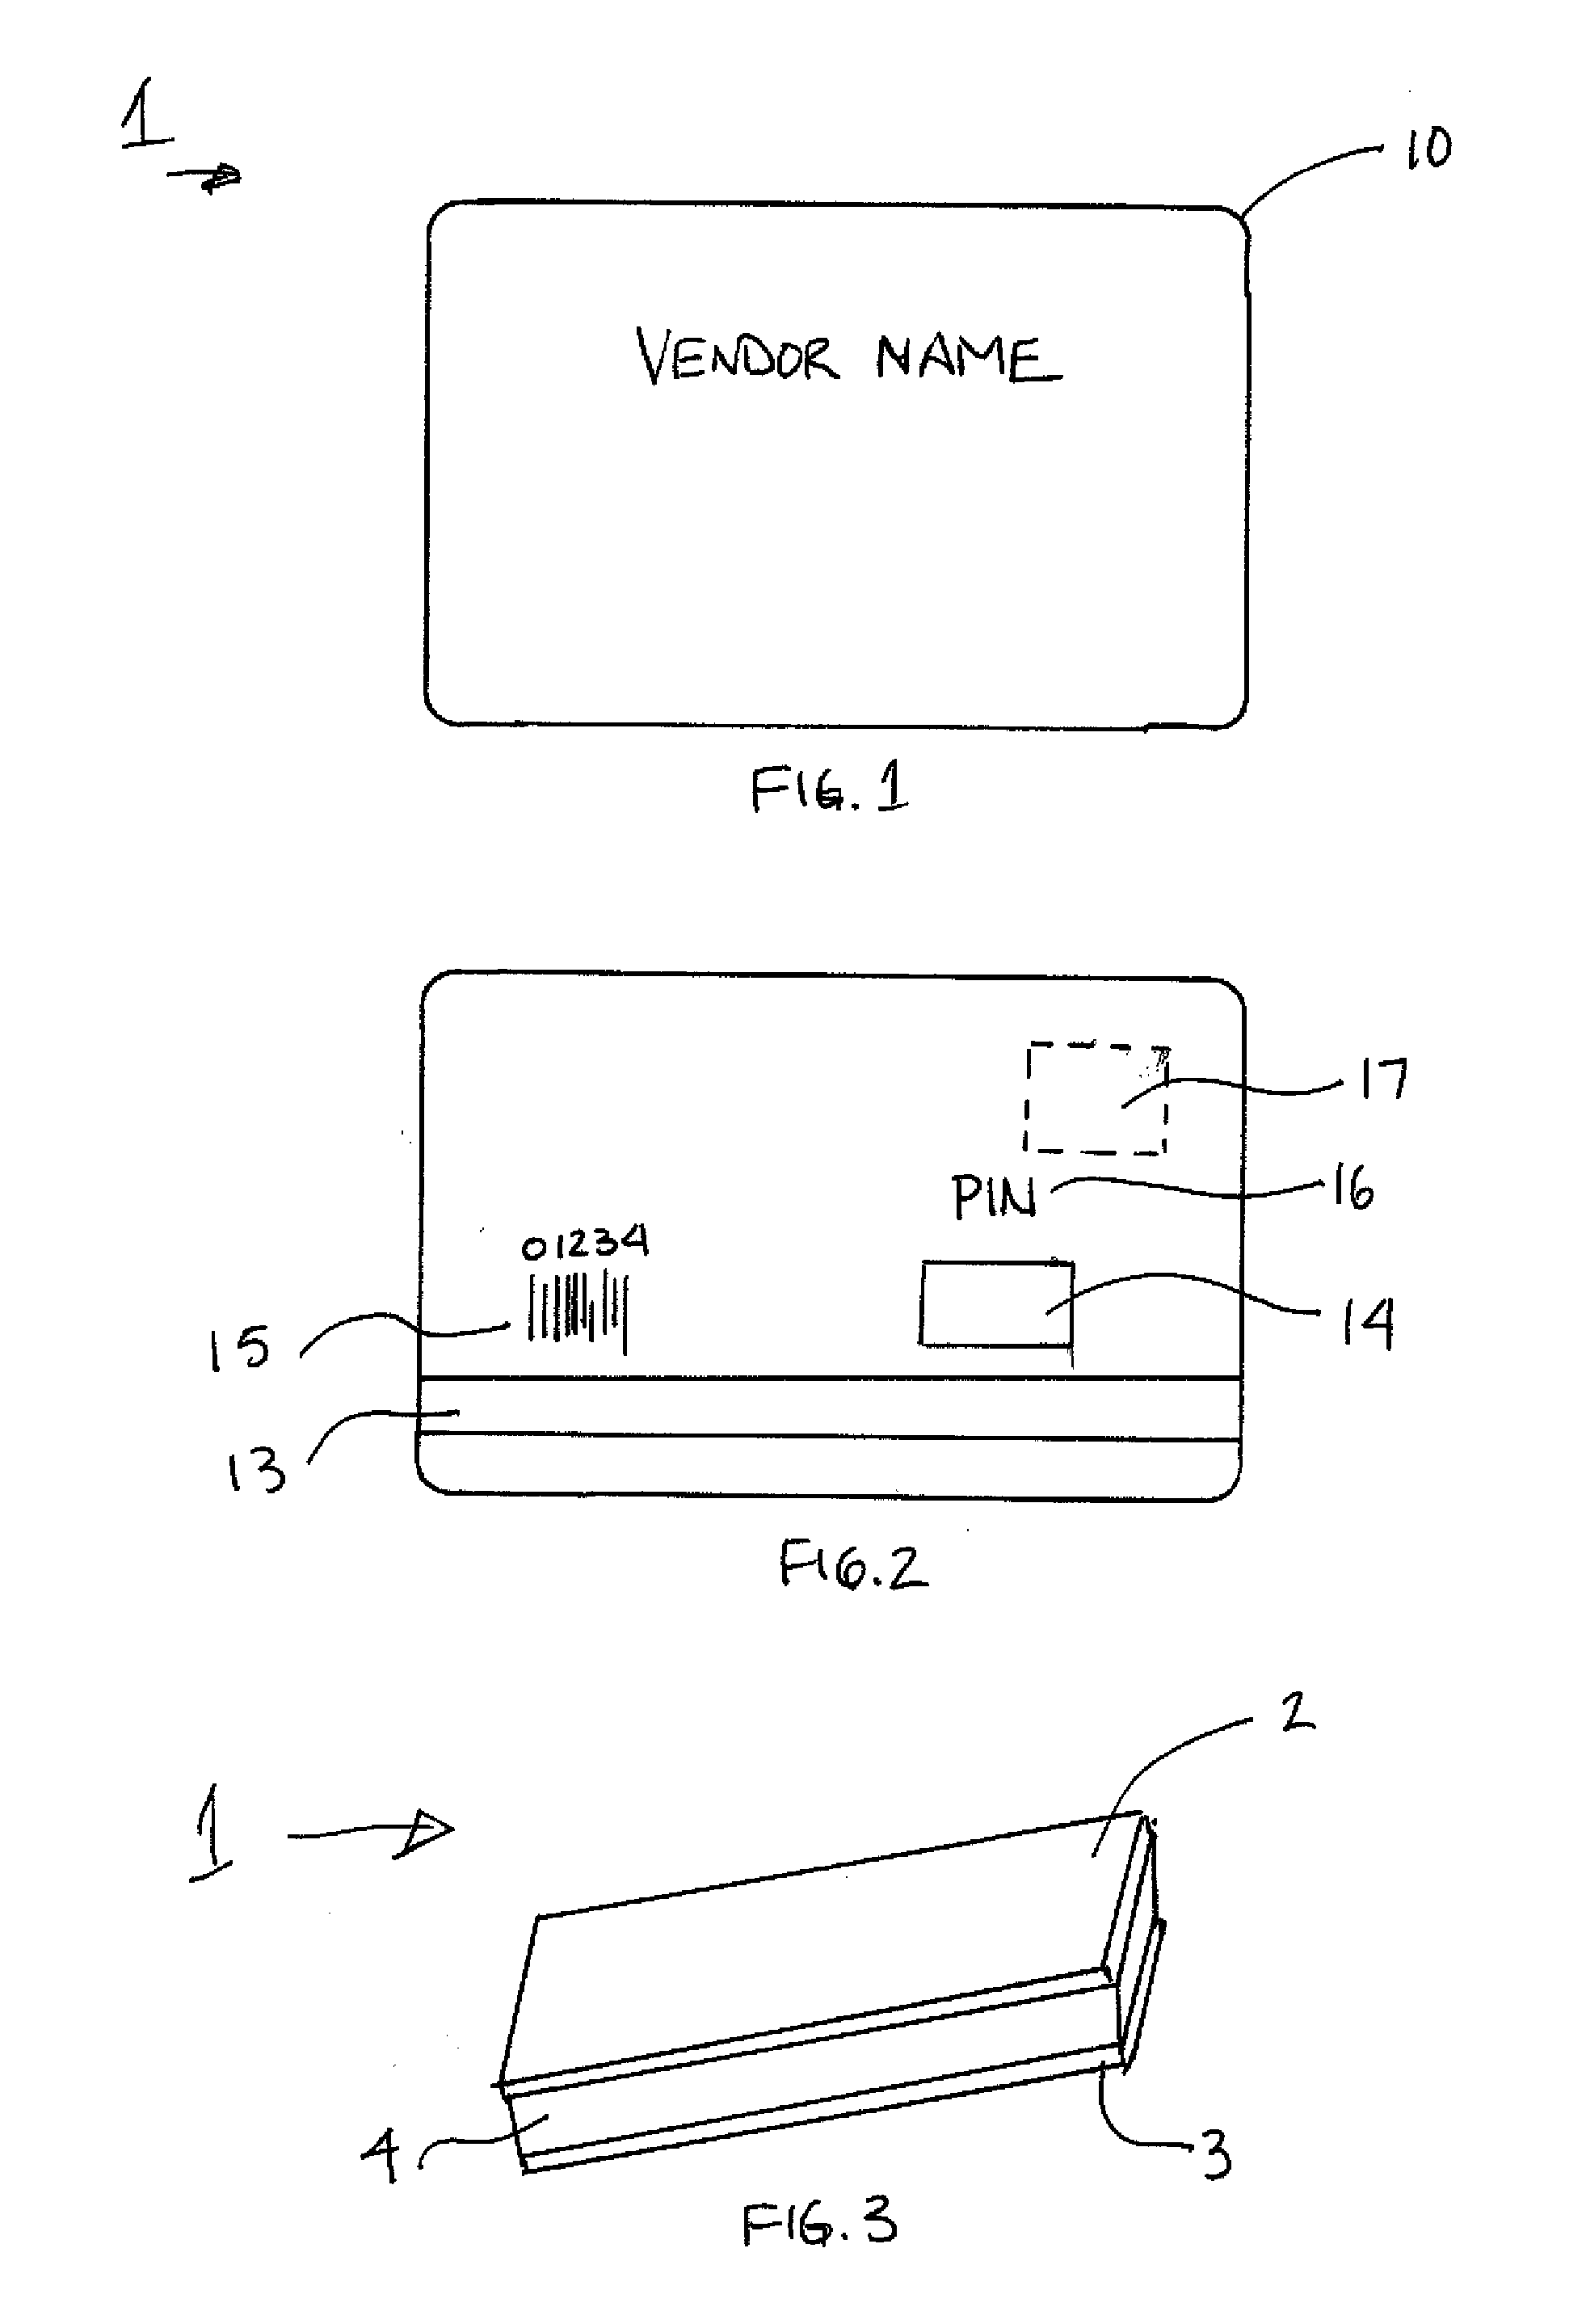 Transaction card assembly and methods of manufacture